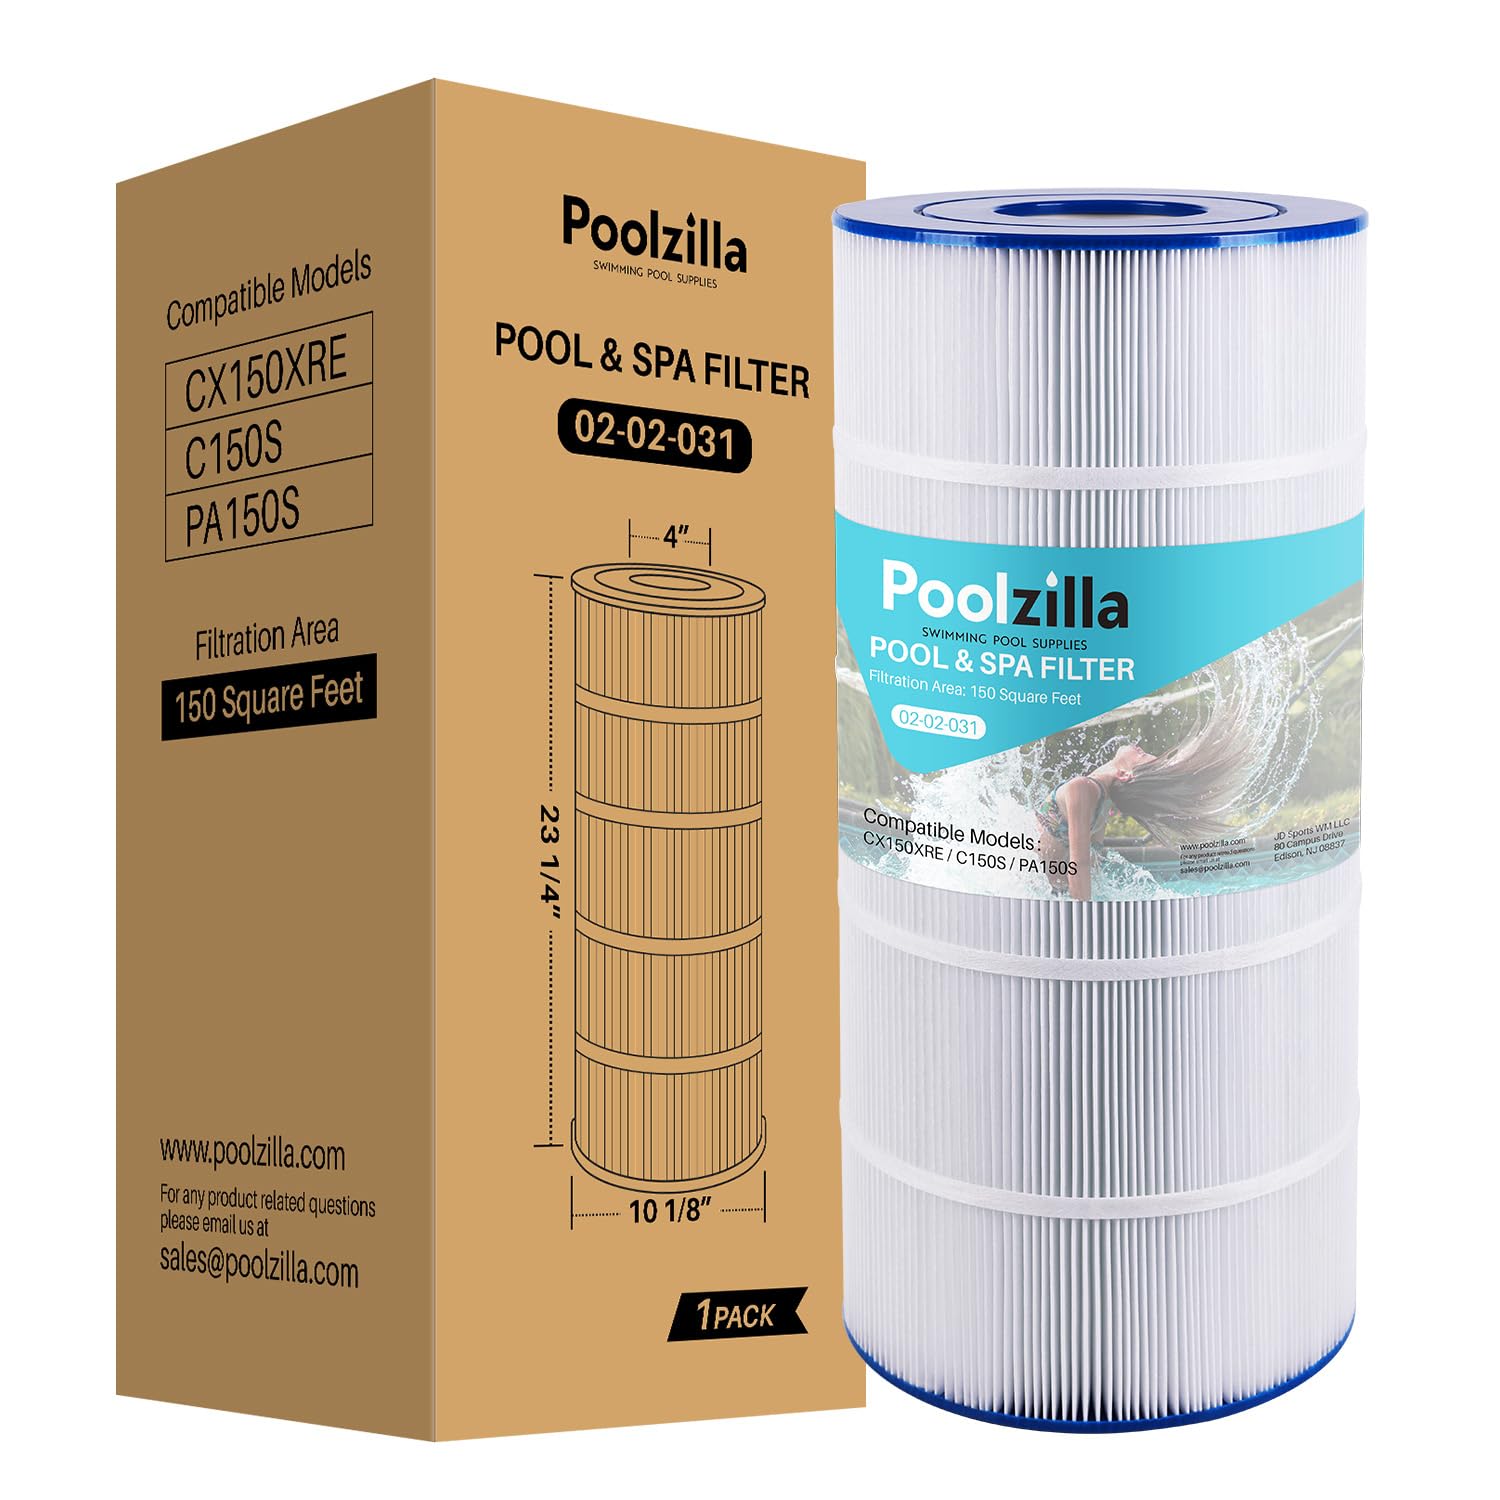 Poolzilla Replacement Pool Filter for PA150S, Hayward SwimClear C150S, CX150XRE, CS150E, Unicel C-9441, Spa-Daddy SD-01333